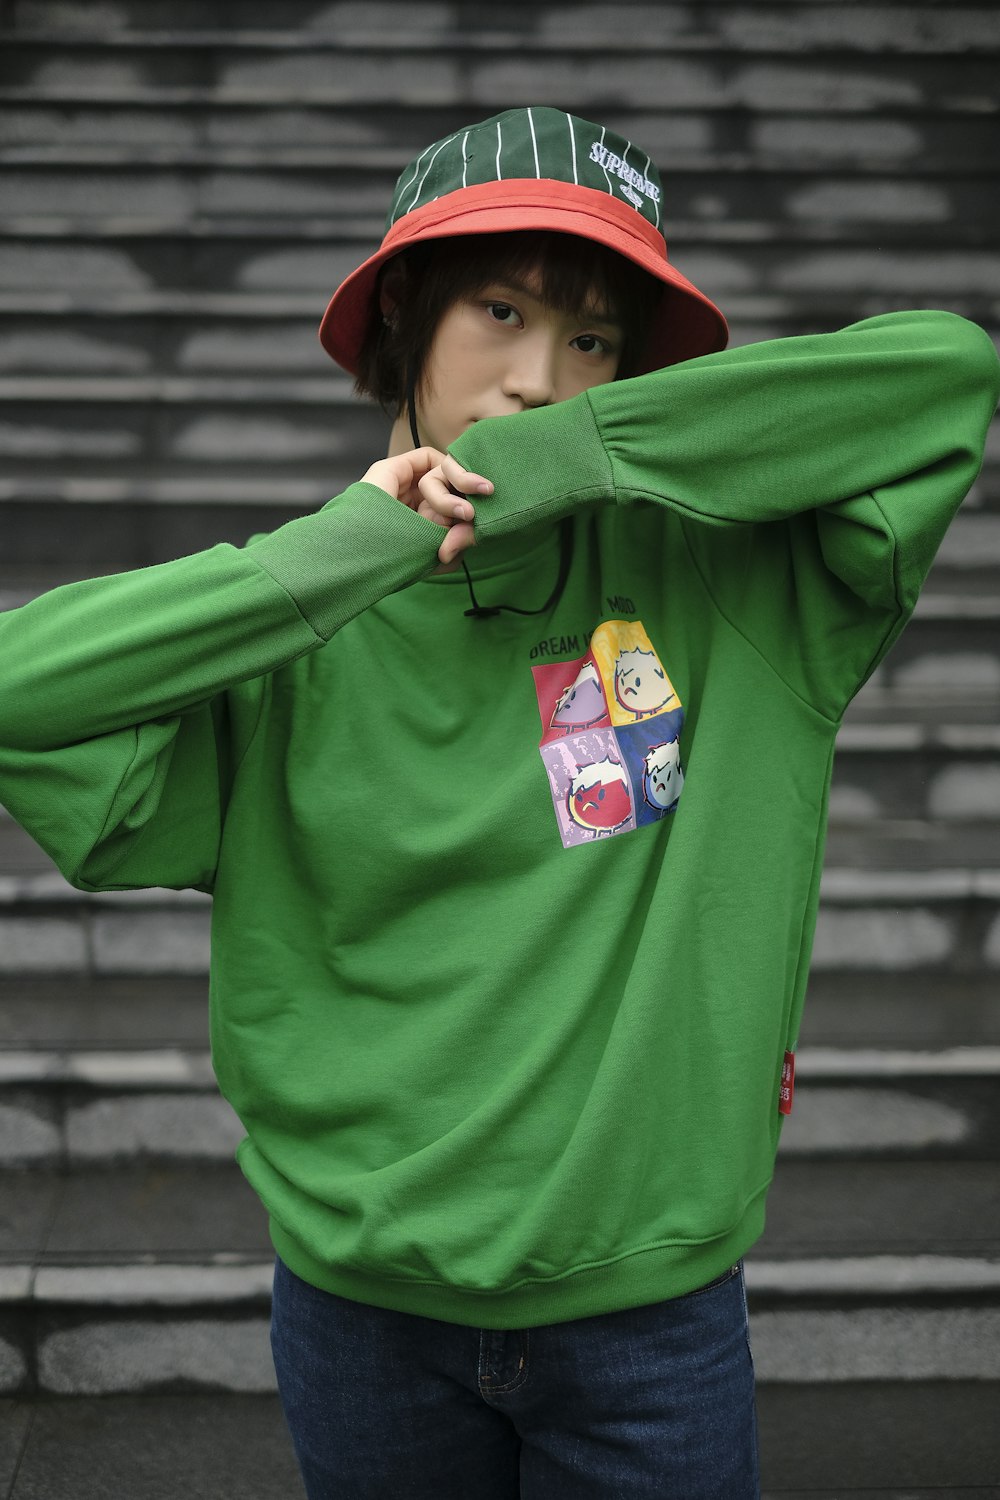 a young man wearing a green sweatshirt and a red hat